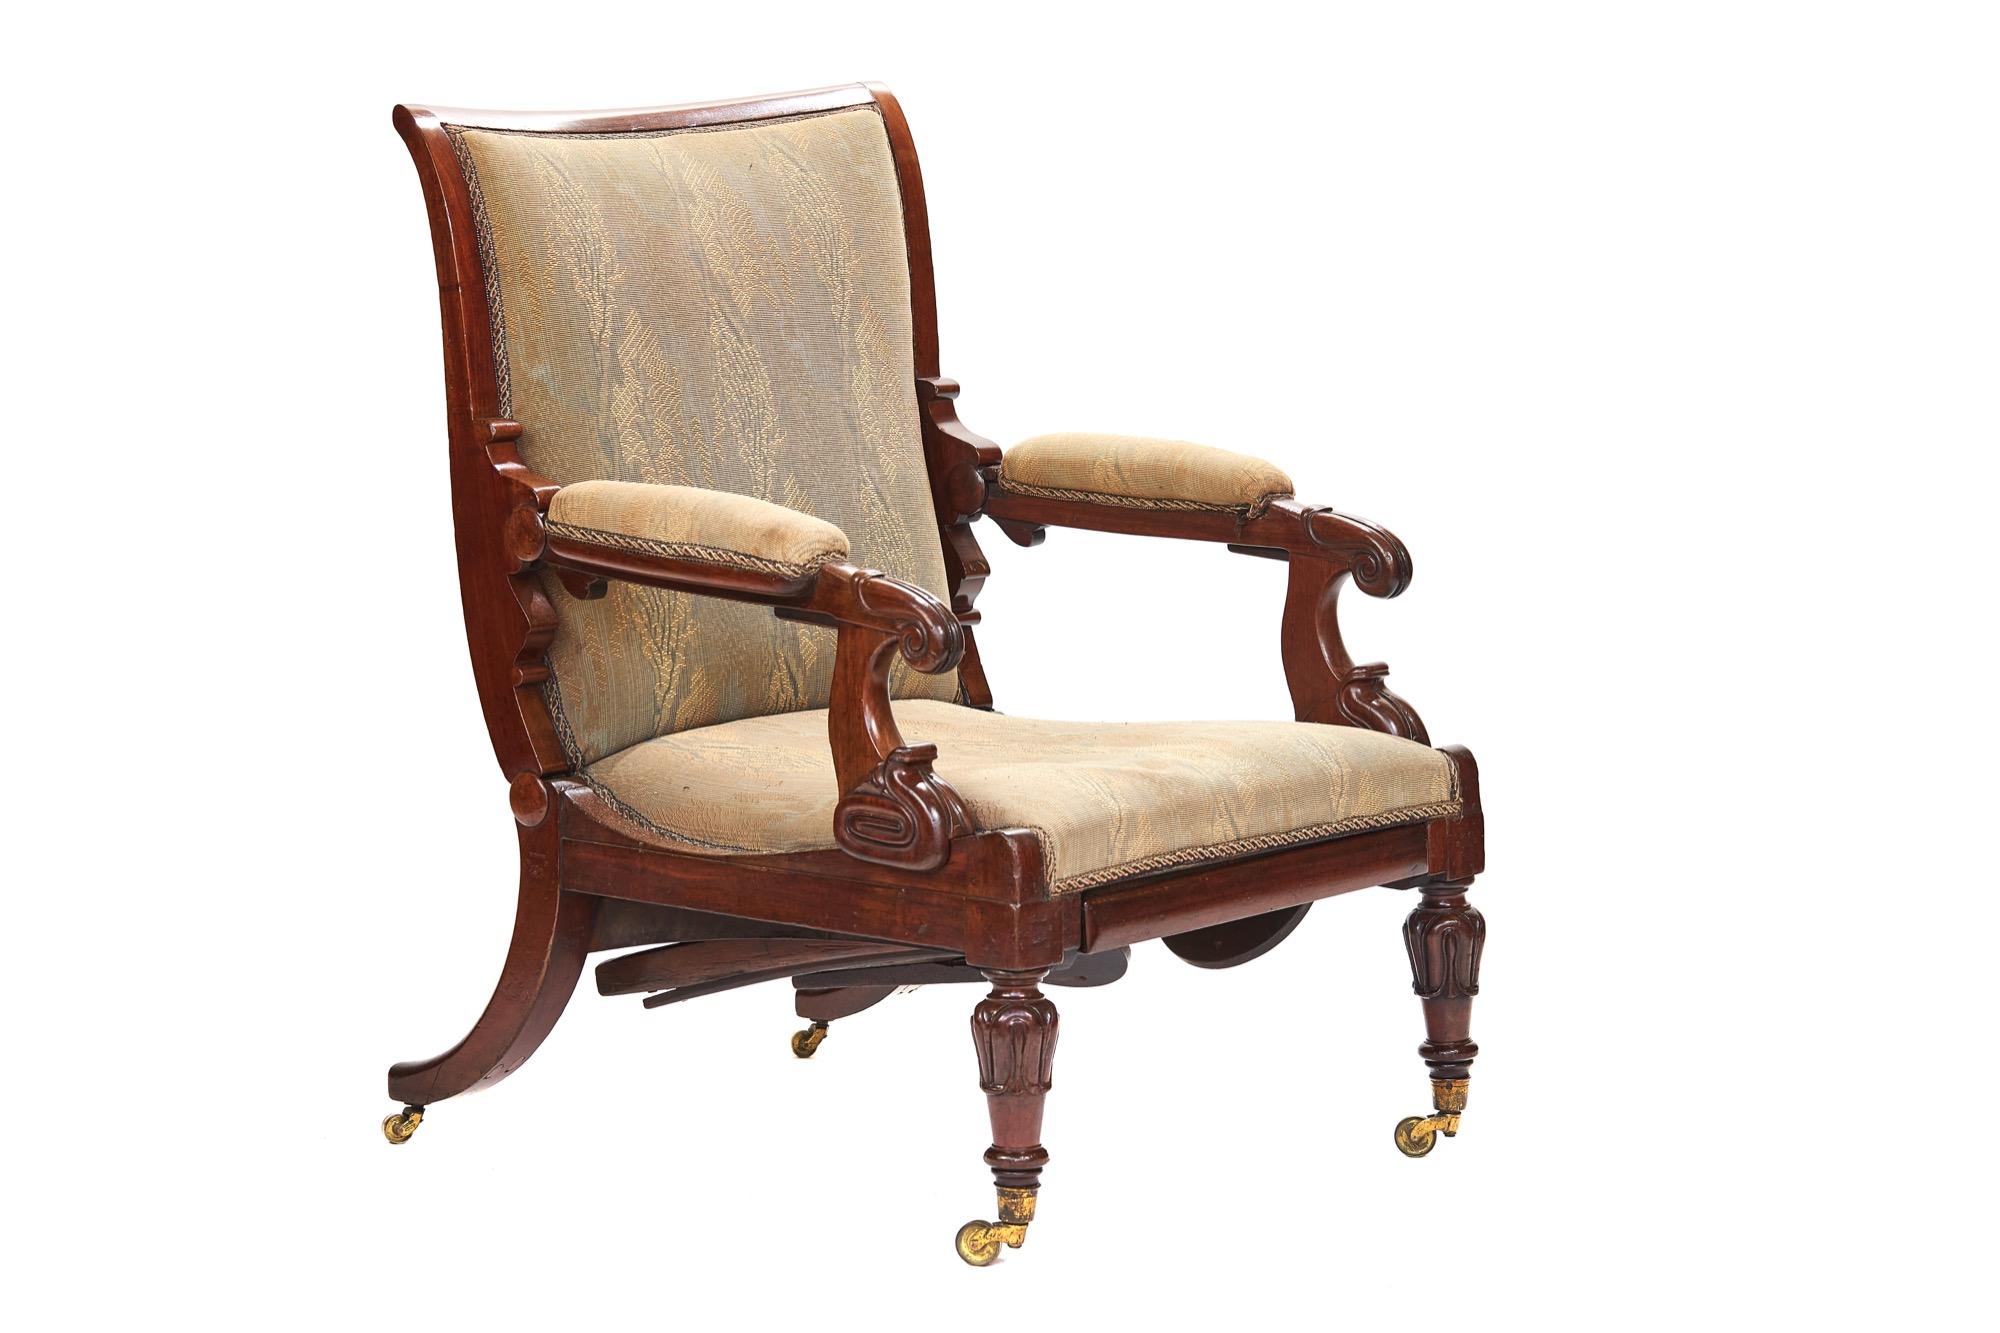 George IV Daws Patent Improved Reclining Chair, circa 1830 For Sale